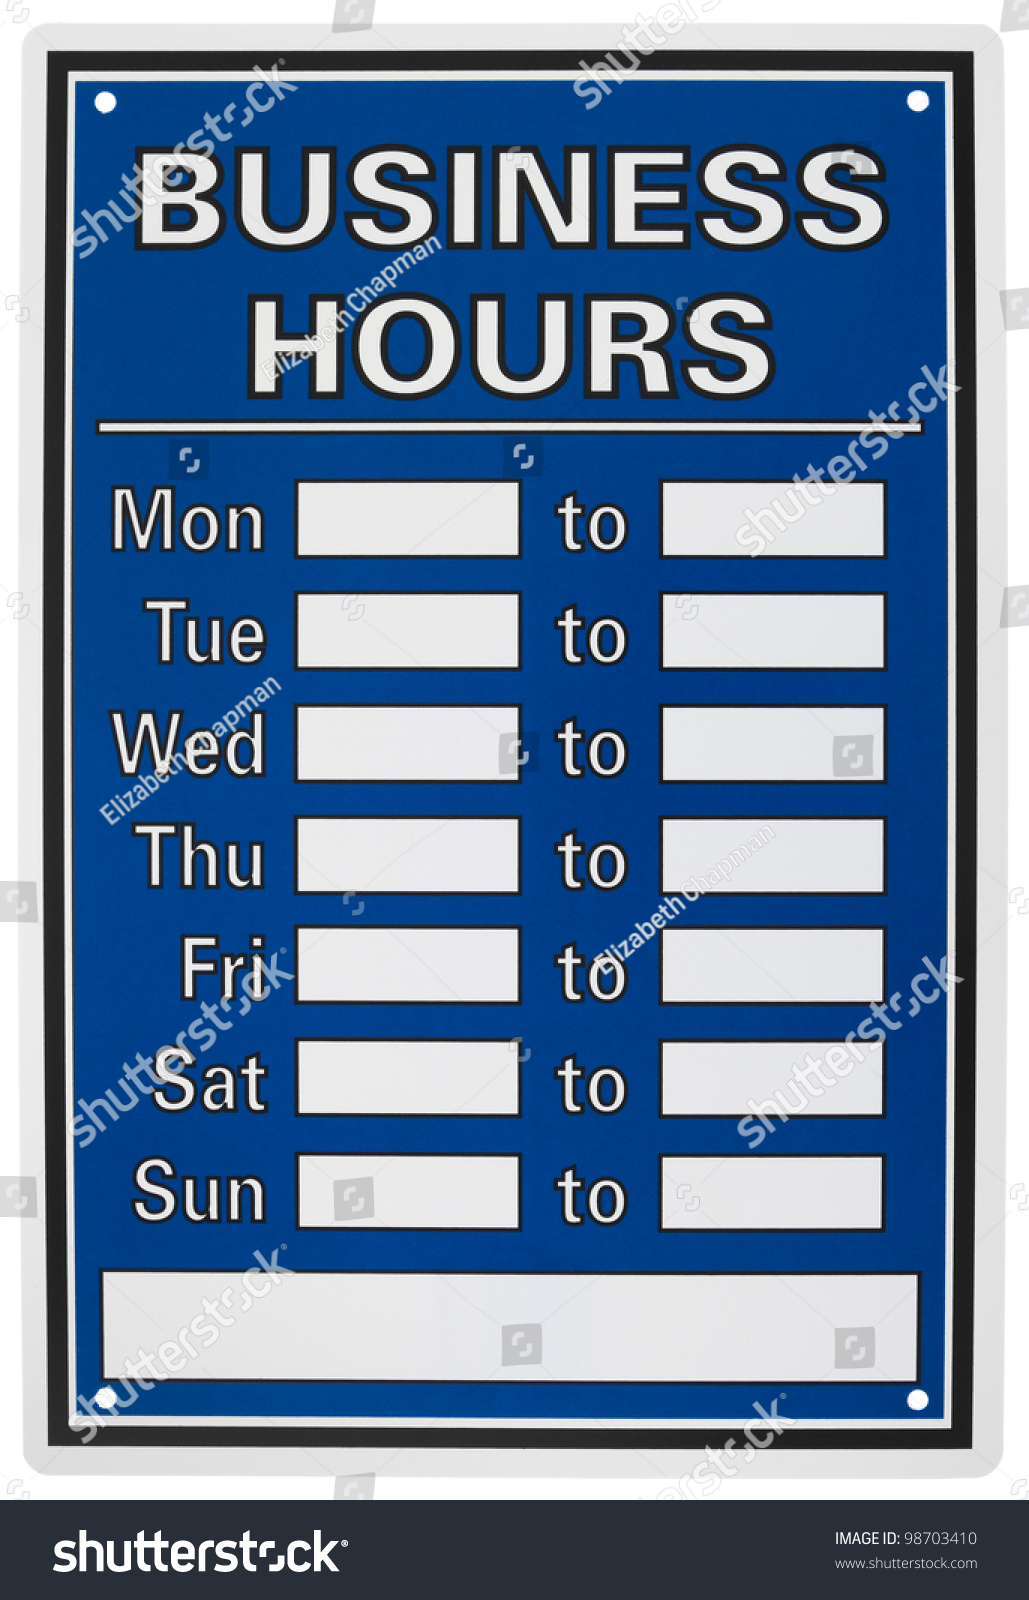 business hours clipart - photo #33